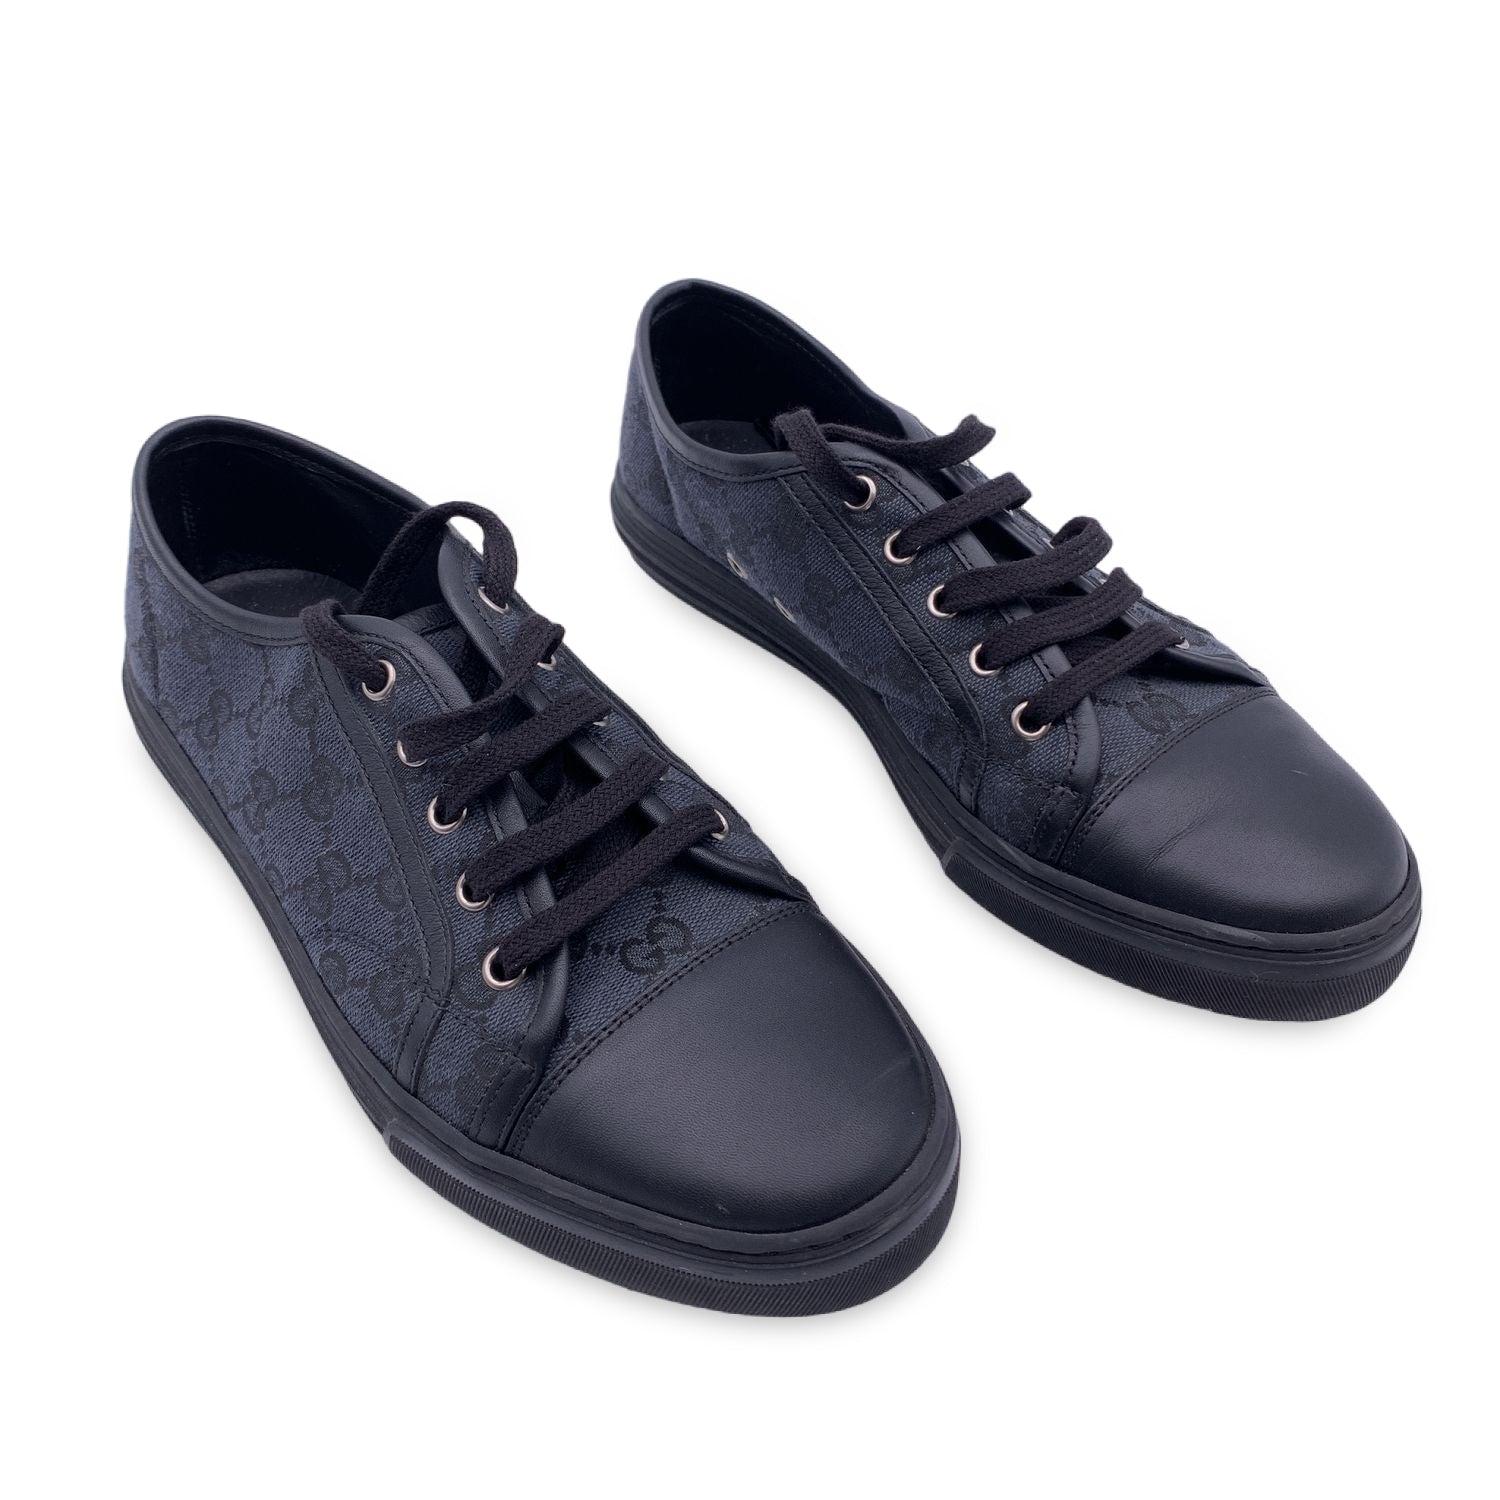 Gucci black monogram sneakers. Low-top canvas and leather sneakers Round toe. Lace-up closure in black. Rubber outsoles. Size 40 Condition A - EXCELLENT Some wear of use on the outsoles. Gucci box included. Details MATERIAL: Cloth COLOR: Black